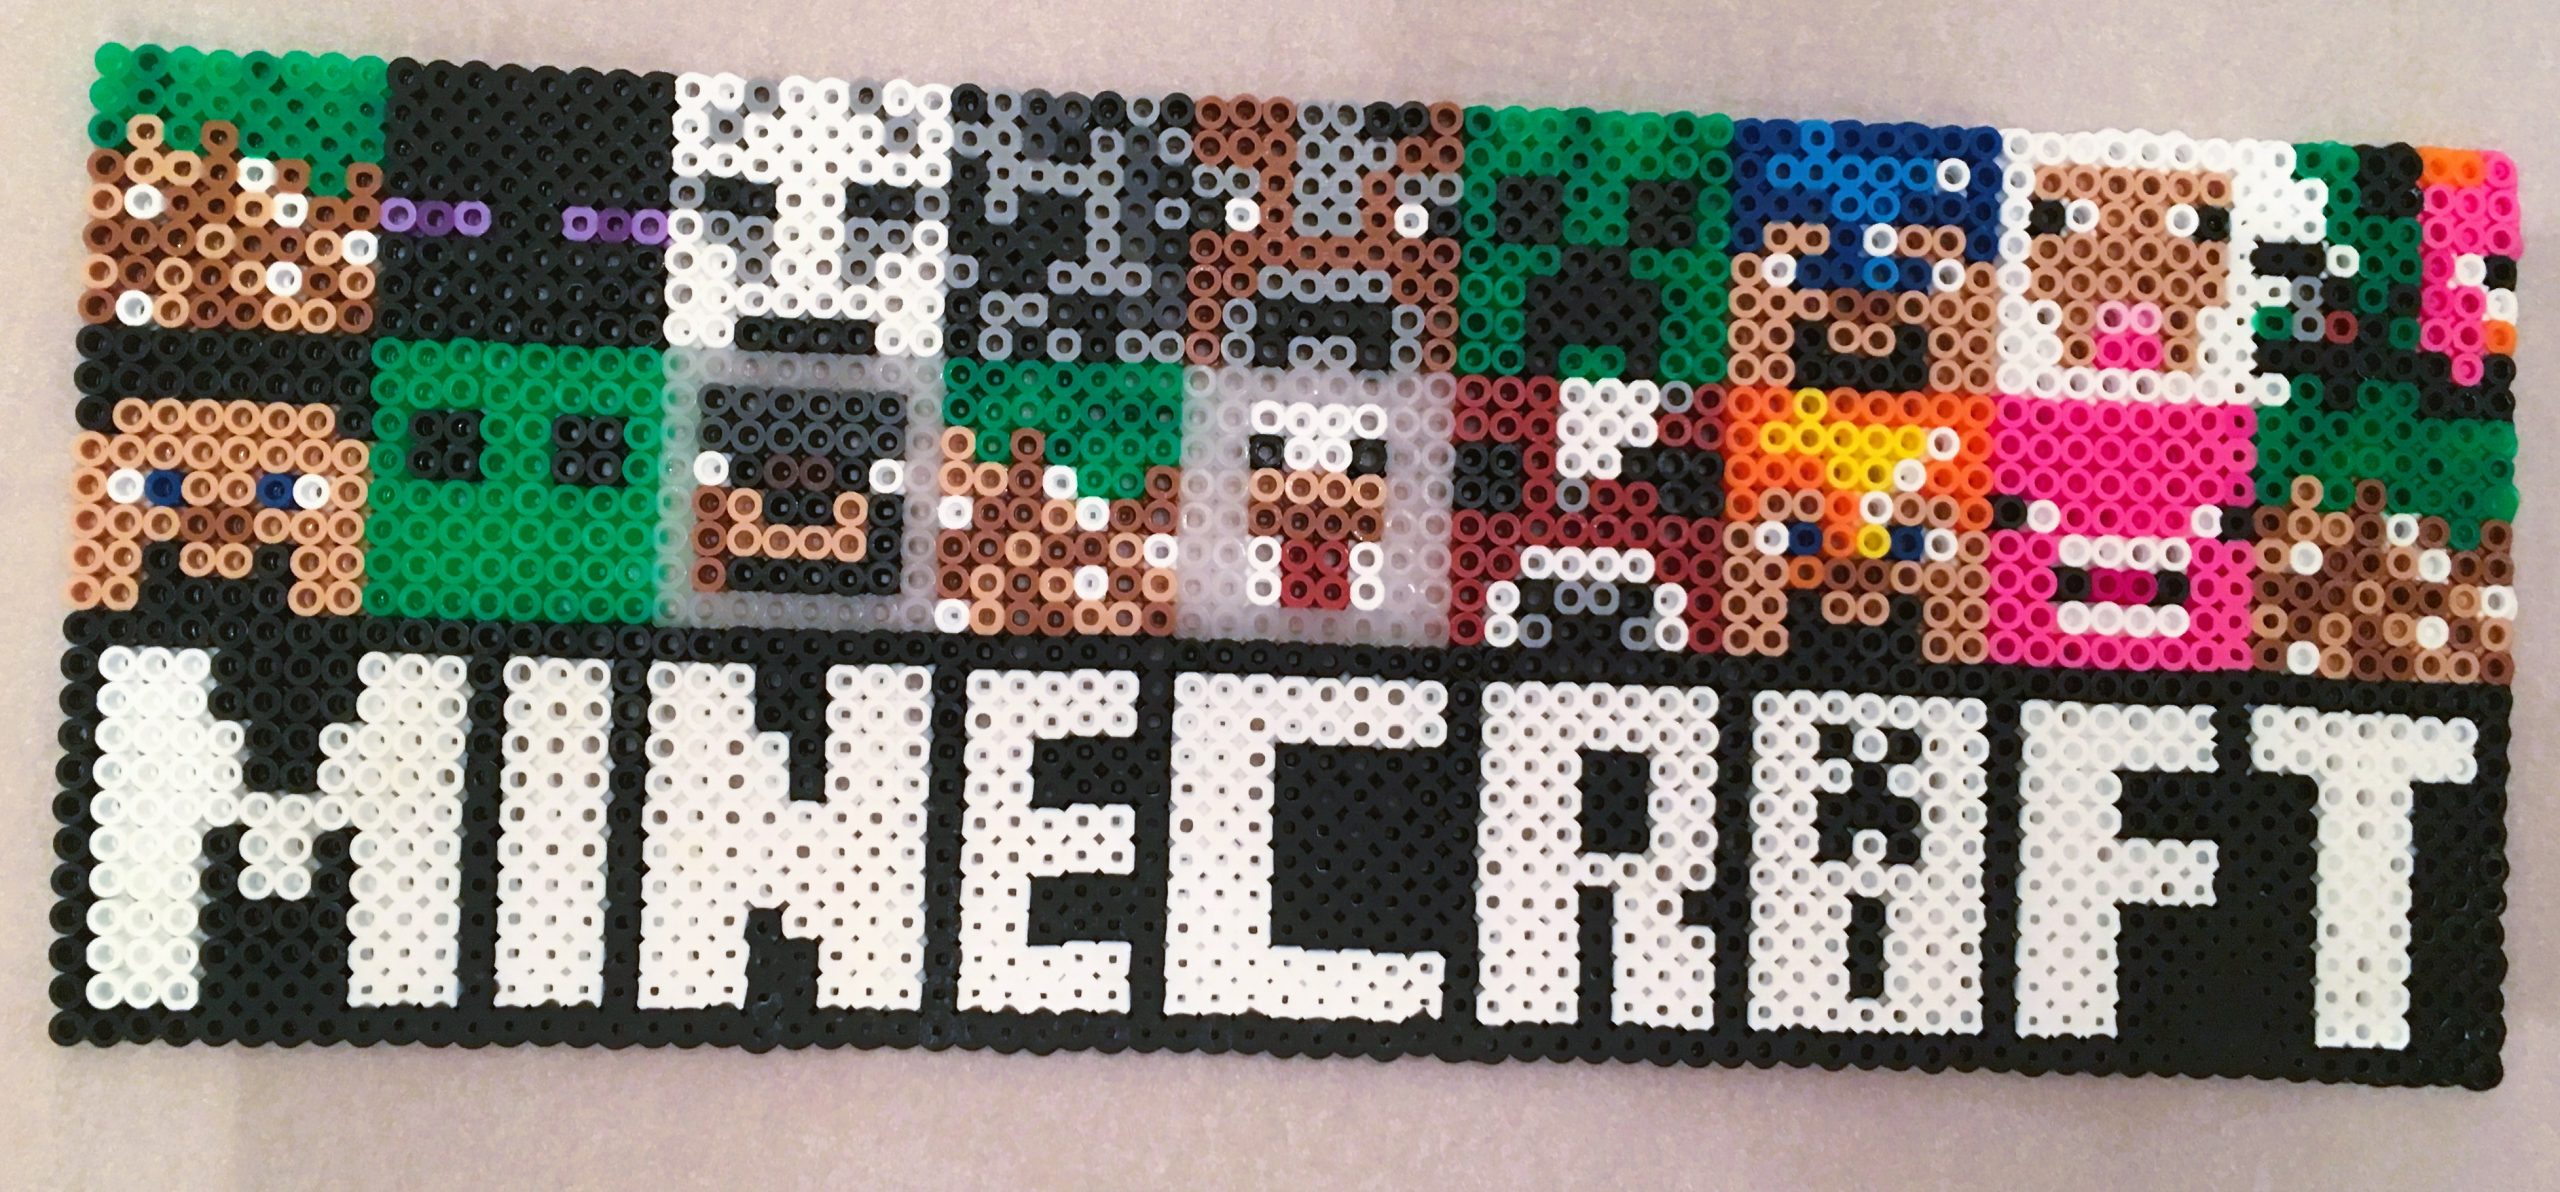 Knitting a Minecraft World: Character Design with Beads